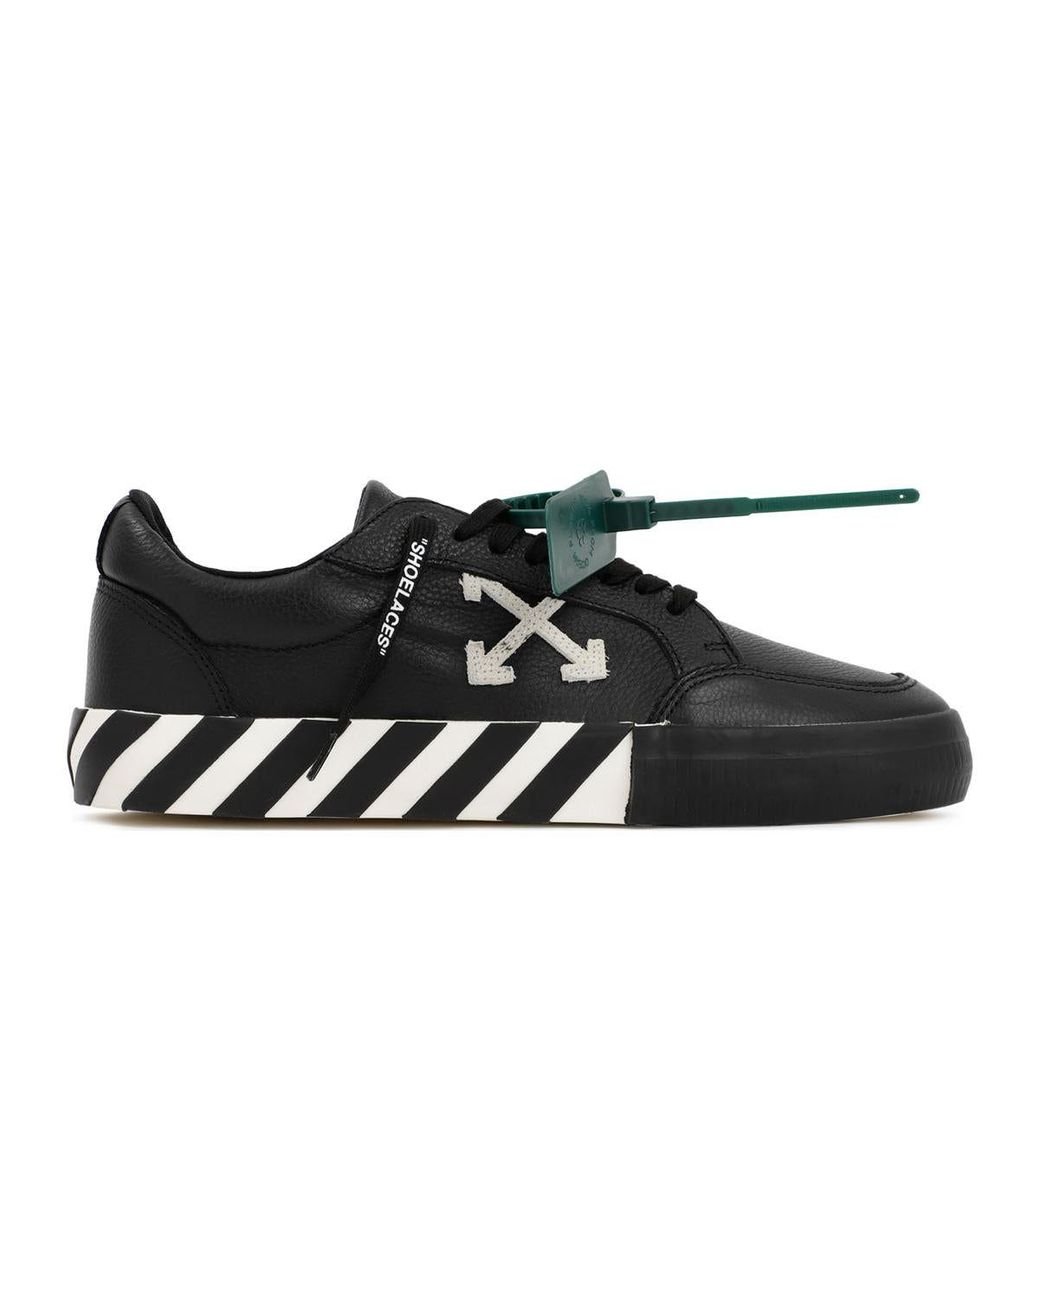 Off-White c/o Virgil Abloh Low Vulcanized Calf Leather Sneakers Shoes ...